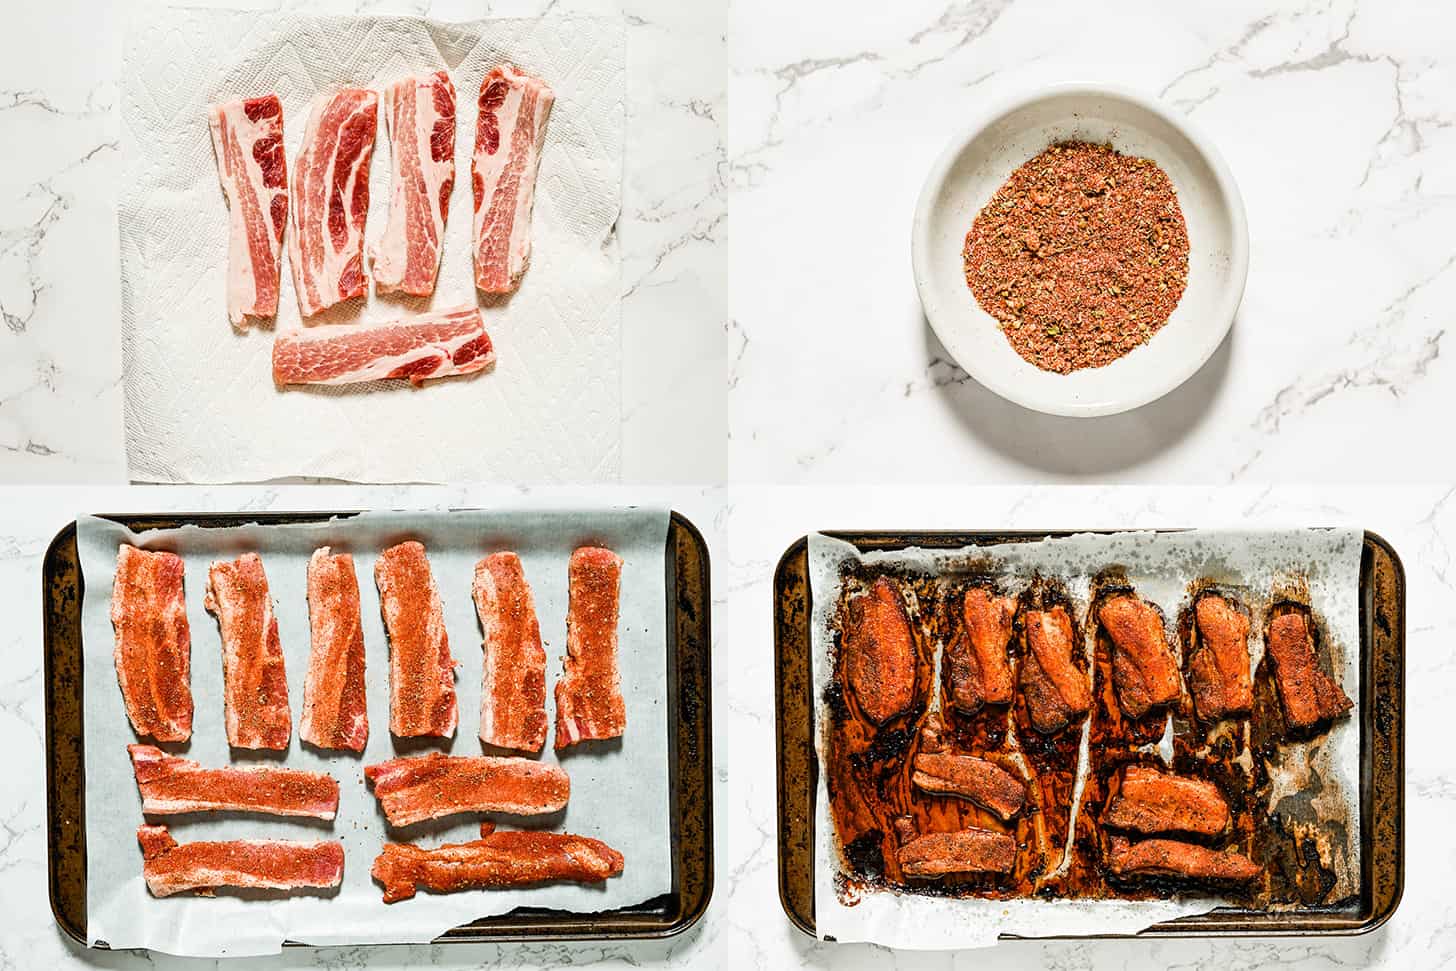 4 pictures showing how to cook this Pork Belly Slices Recipe.